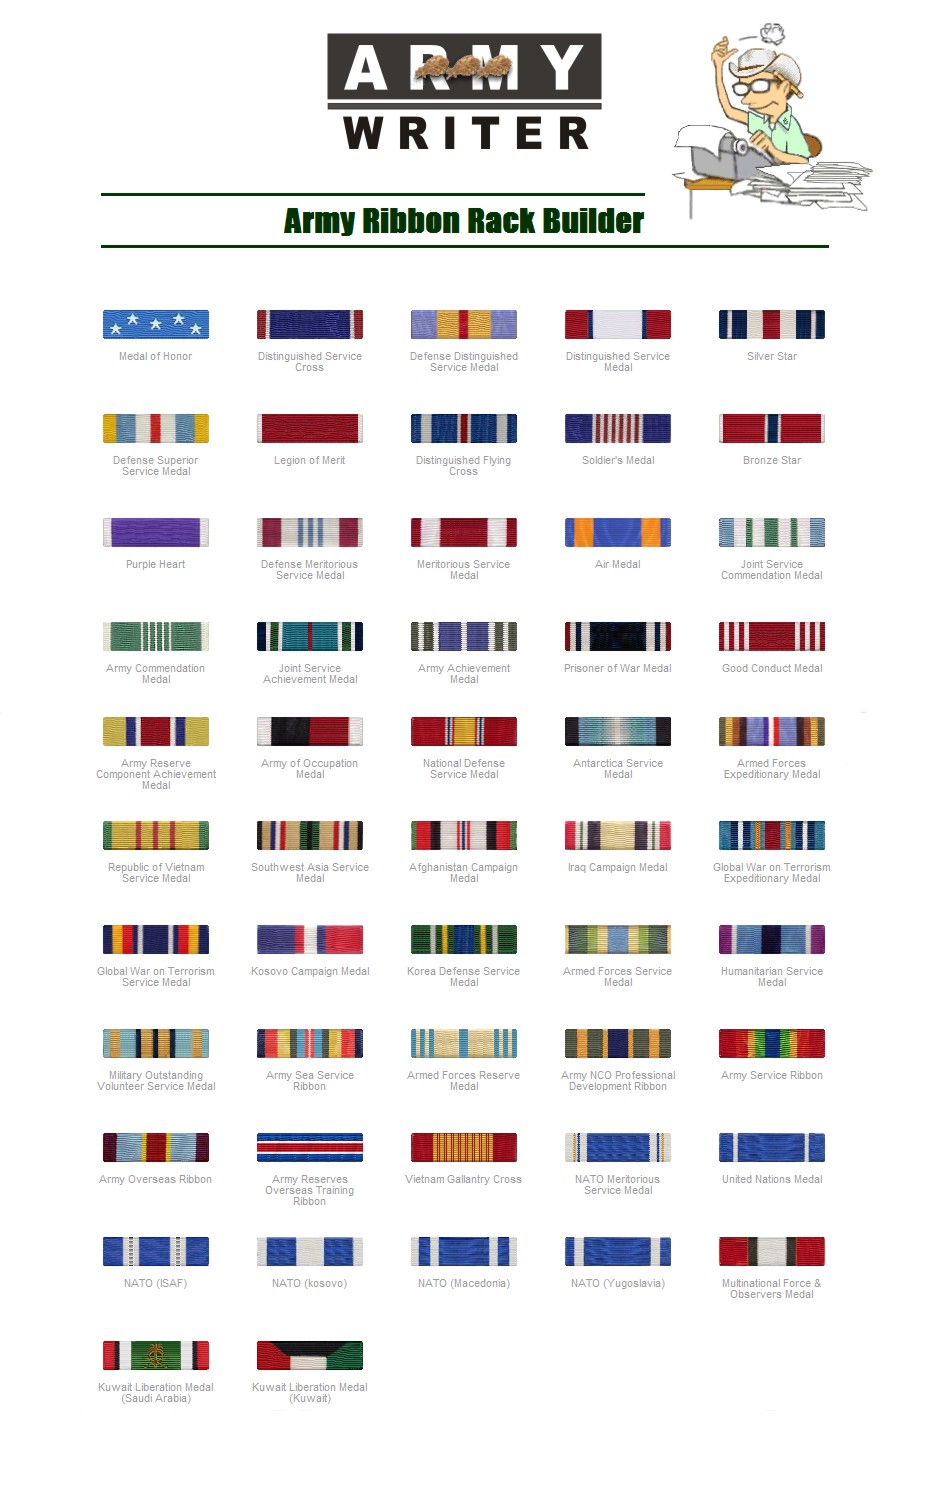 Us Army Award Writing Help Joint Service Commendation Medal Display Recognition